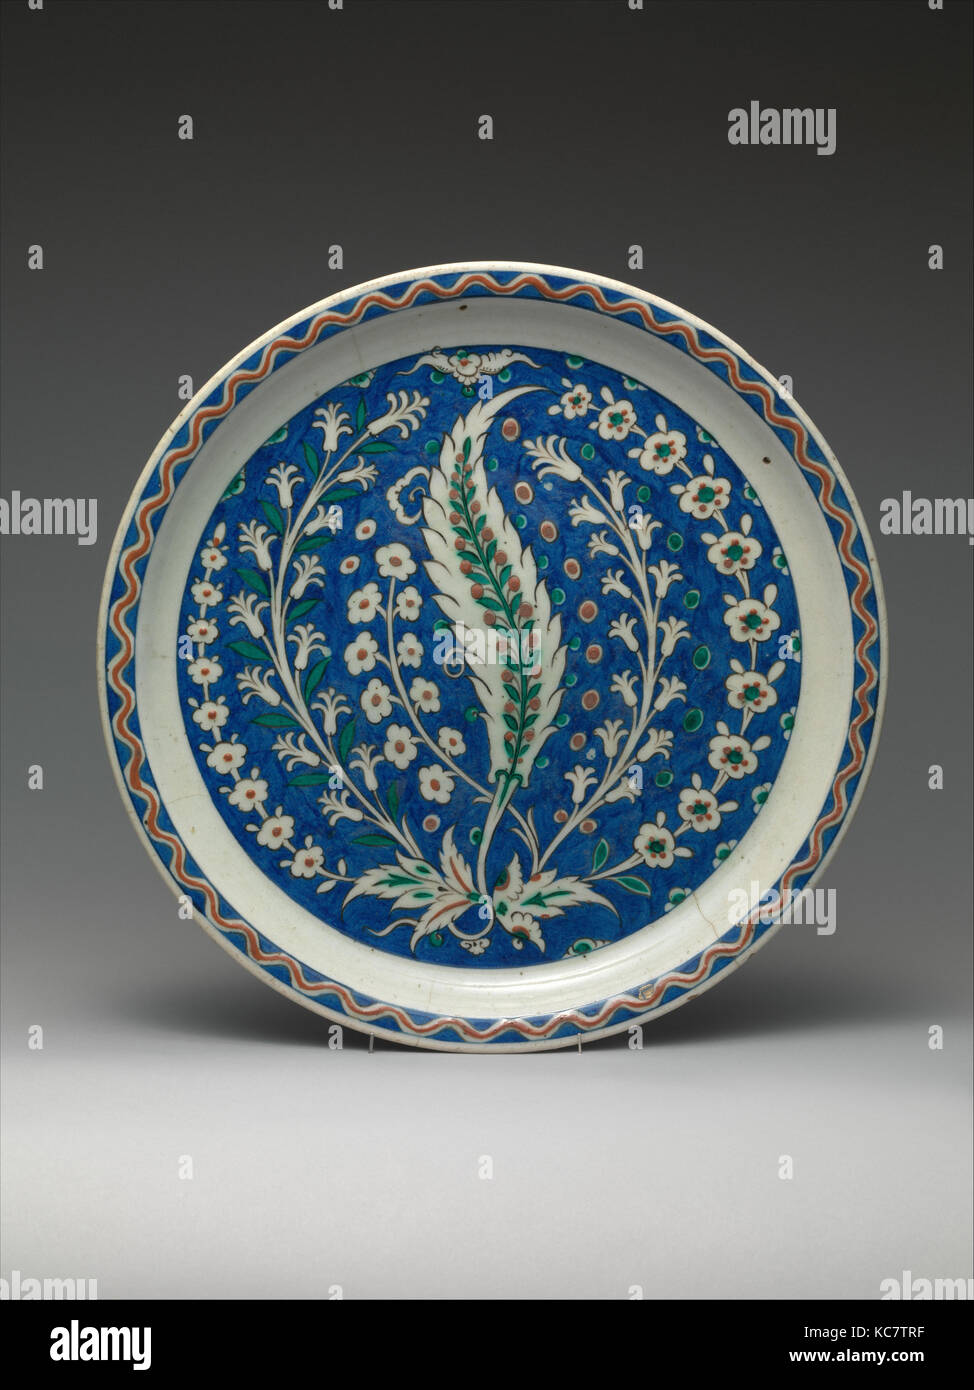 Dish with Growing Saz and Floral Design, first half 17th century Stock Photo